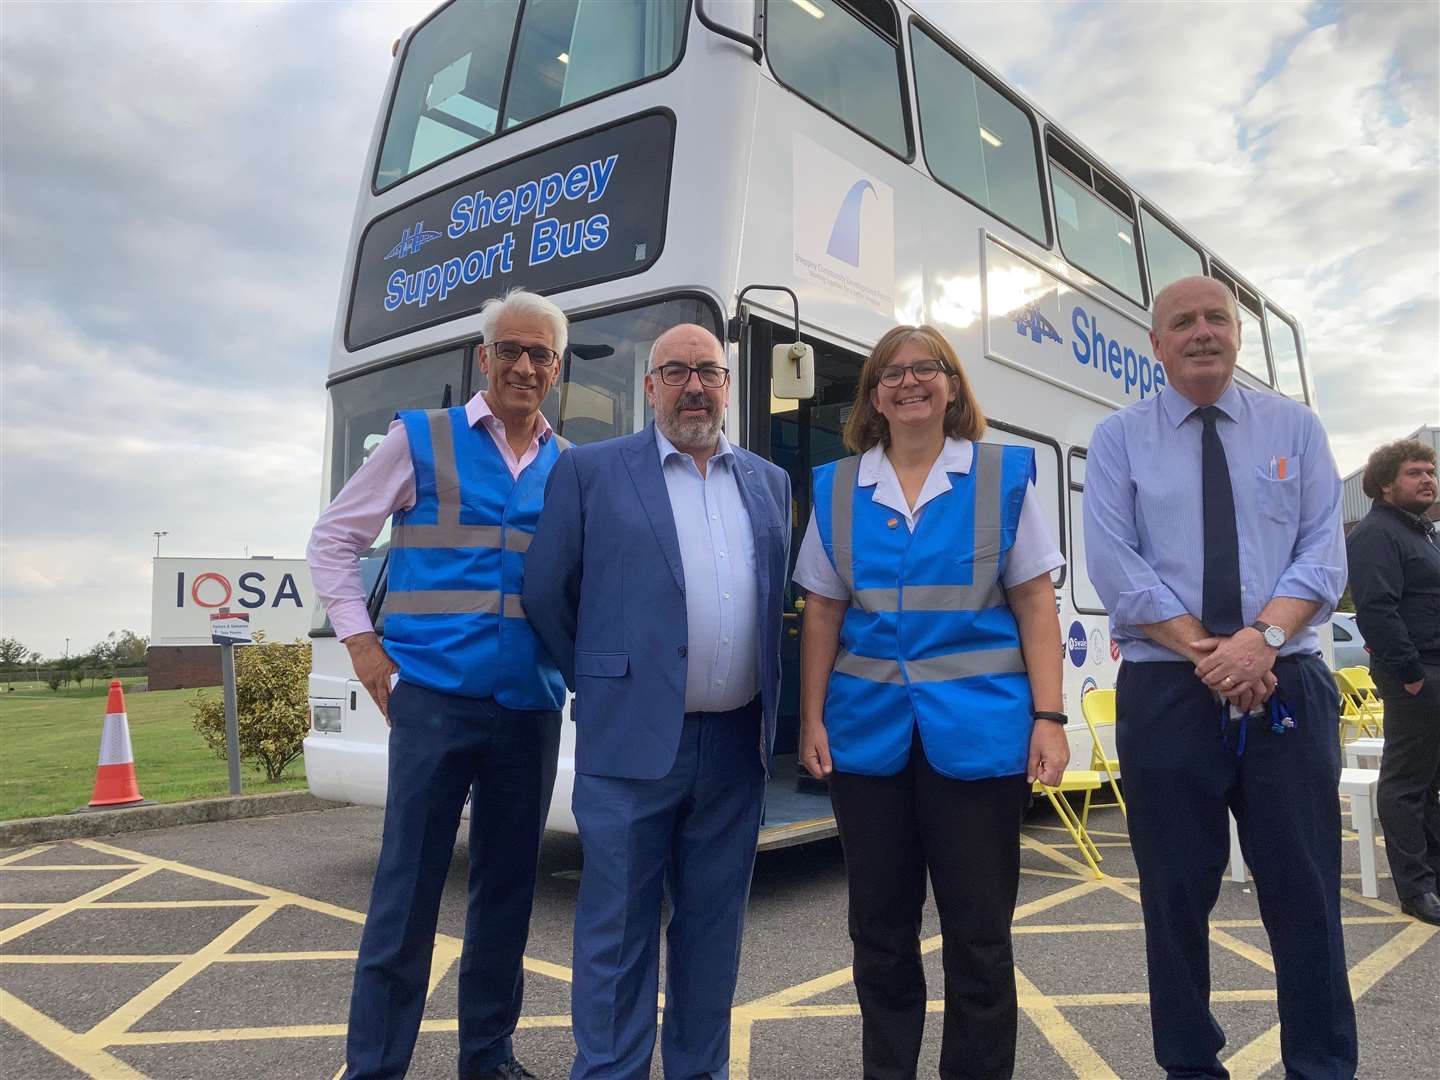 Sheppey Support Bus launch with, from the left, Steve Chalke, Tim Lambkin, Lynne Clifton and Paul Murray at the Minster campus of the Oasis Academy